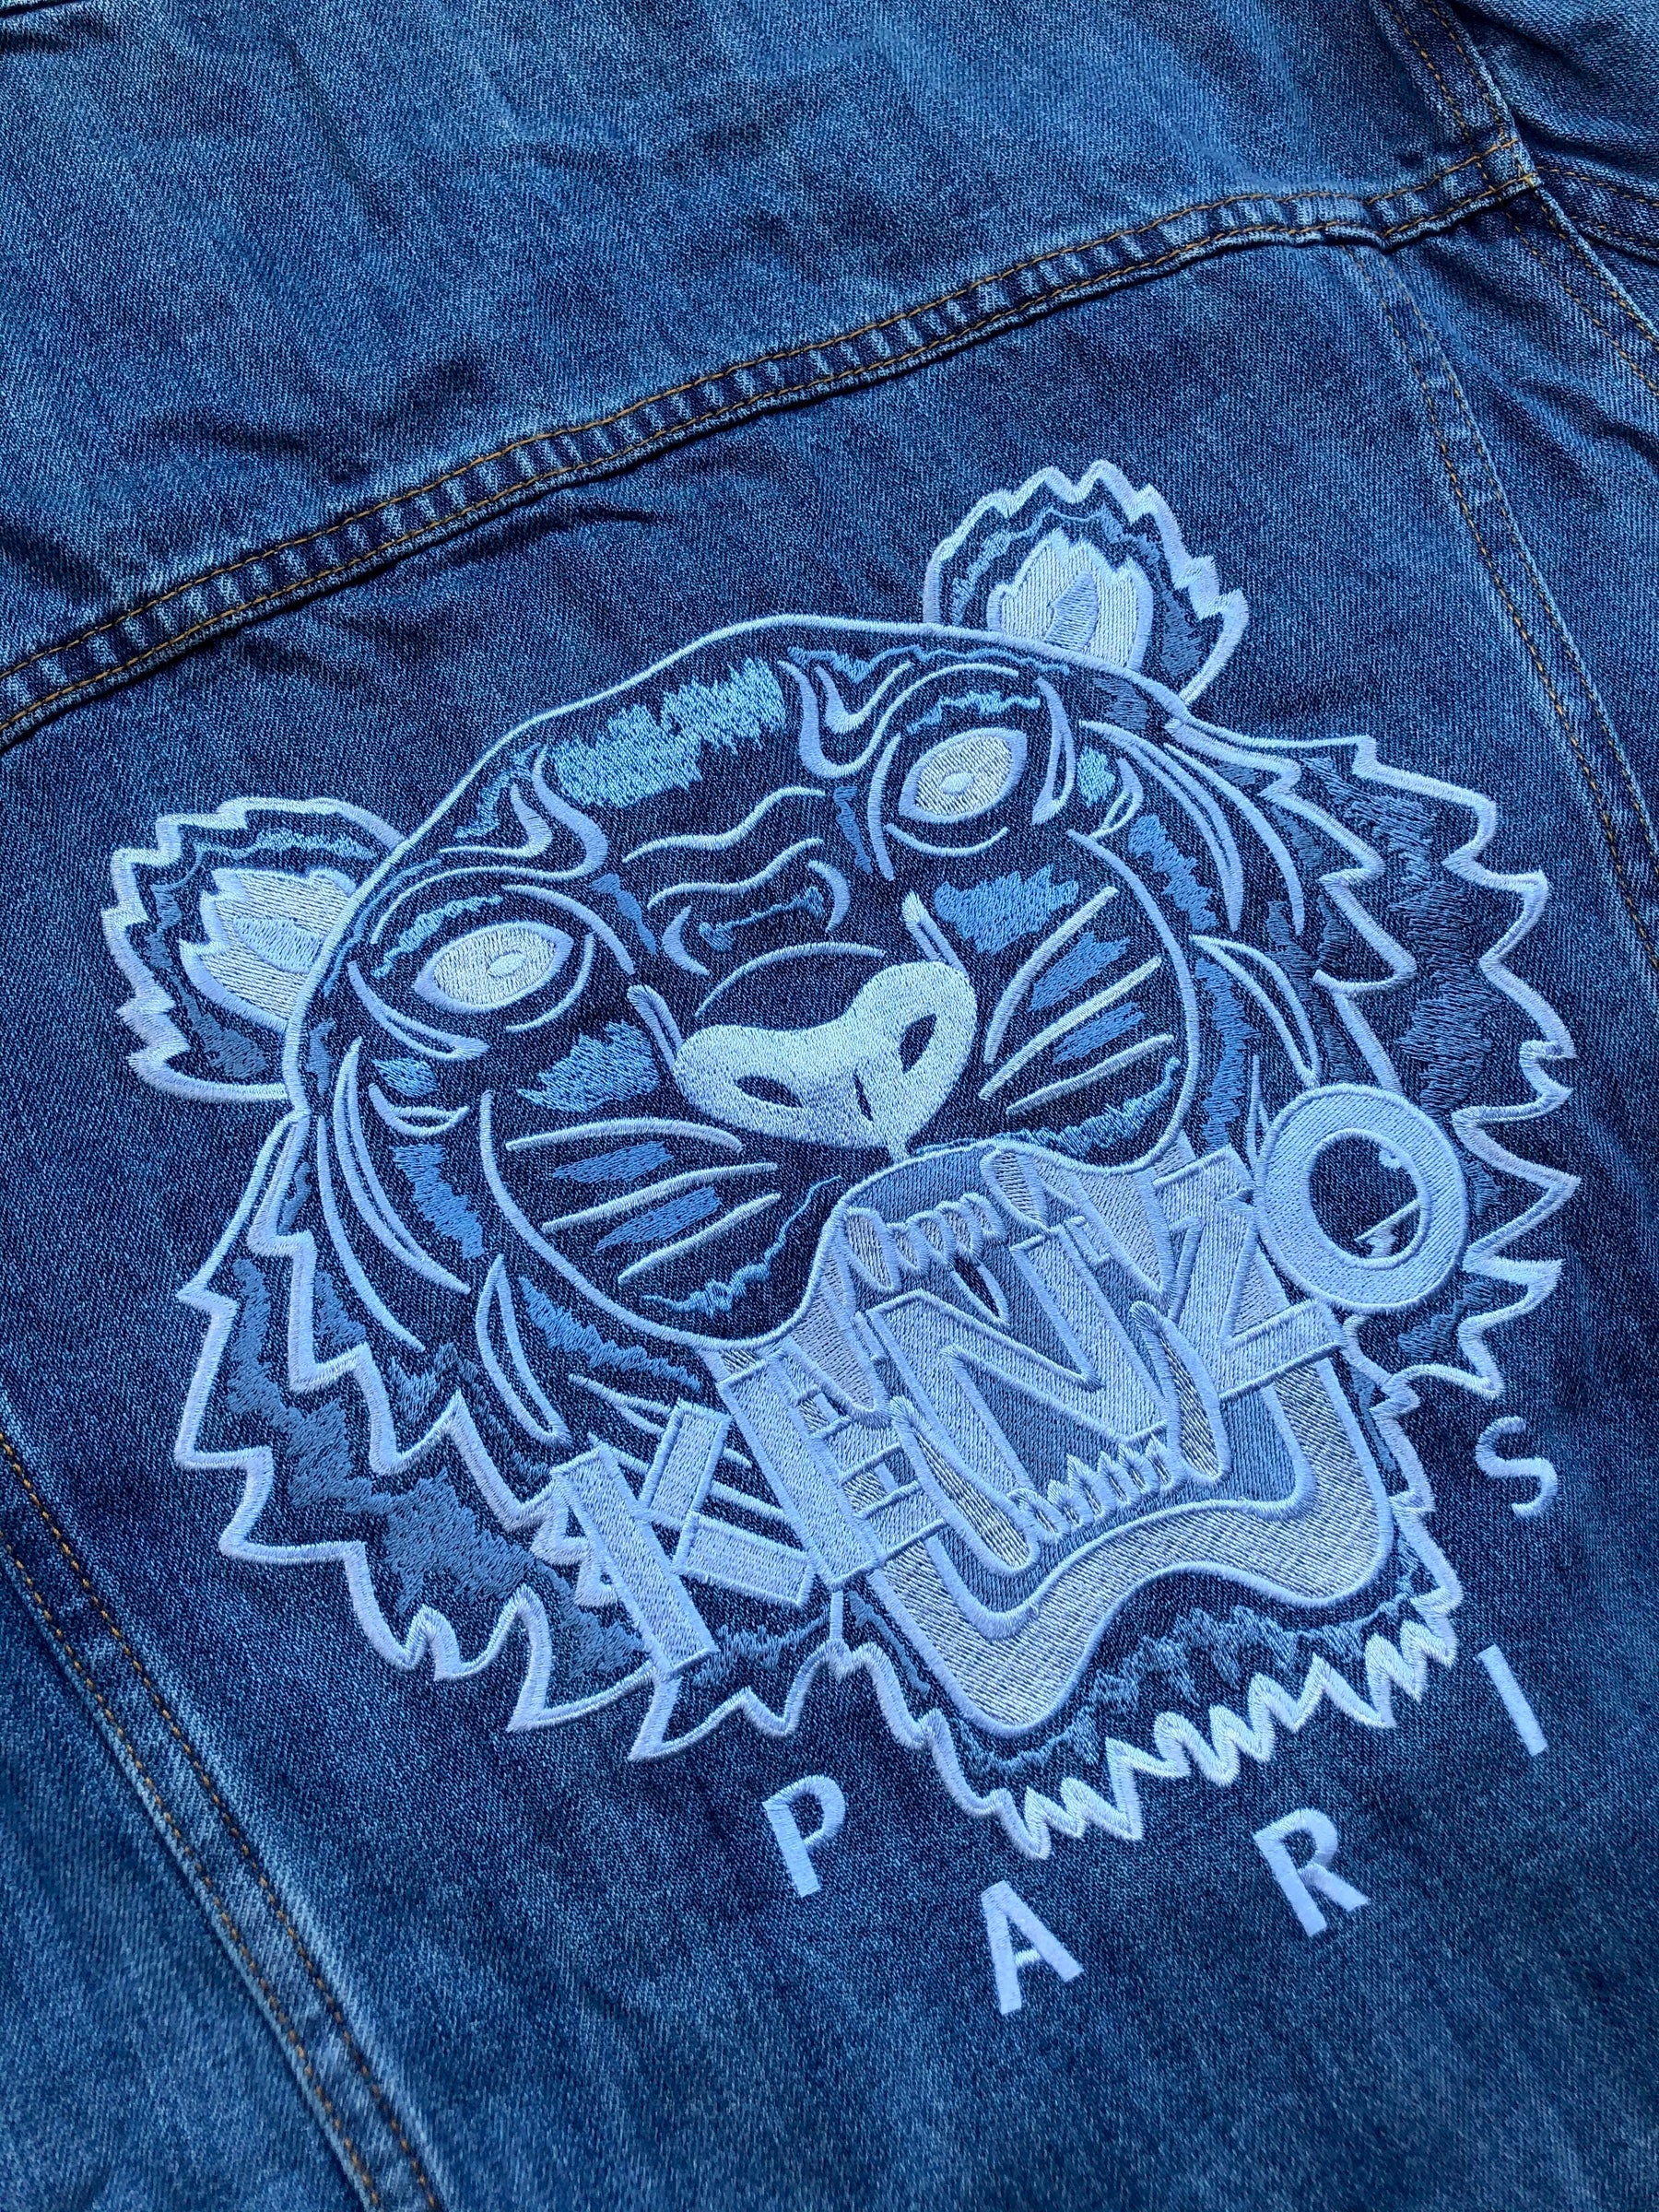 Kenzo Embroidered Tiger Denim Jacket - Shop Streetwear, Sneakers, Slippers and Gifts online | Malaysia - The Factory KL